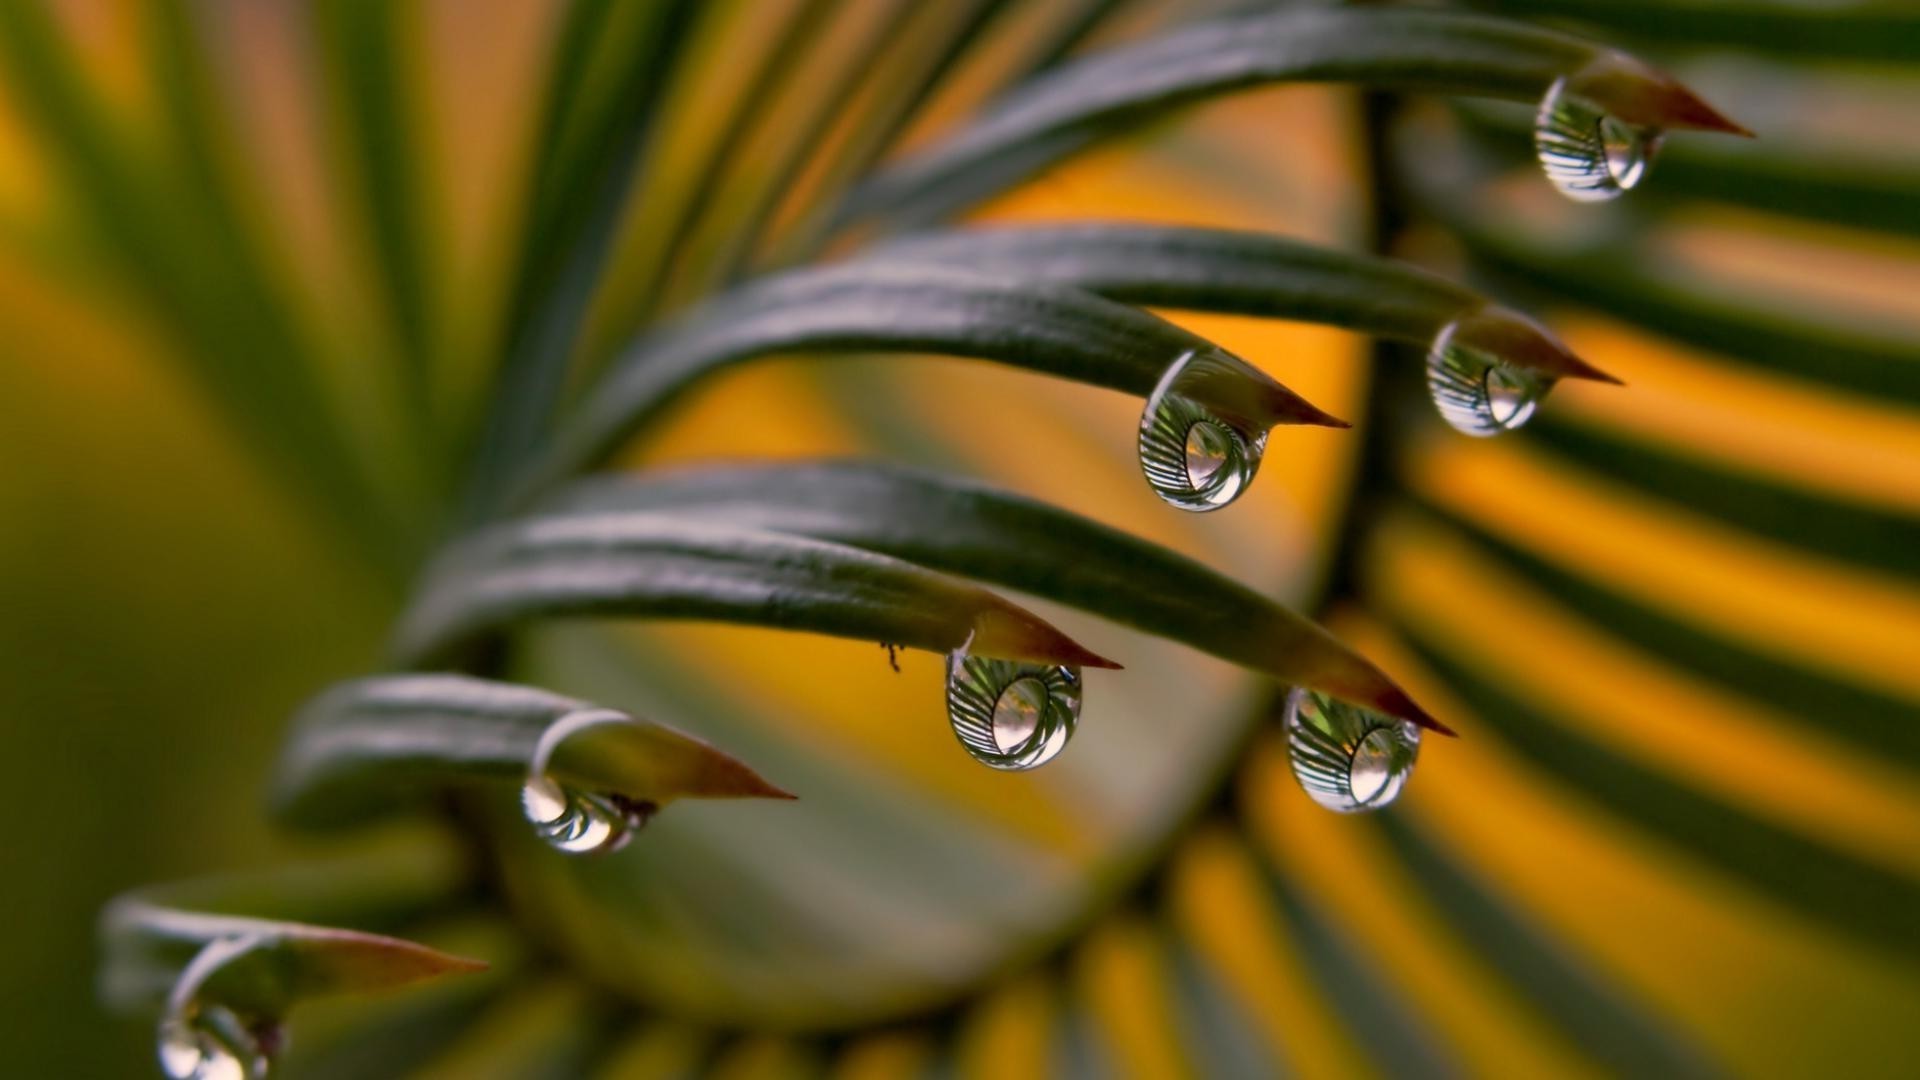 droplets and water rain drop dew nature water leaf flora droplet purity blur dof wet color garden summer outdoors